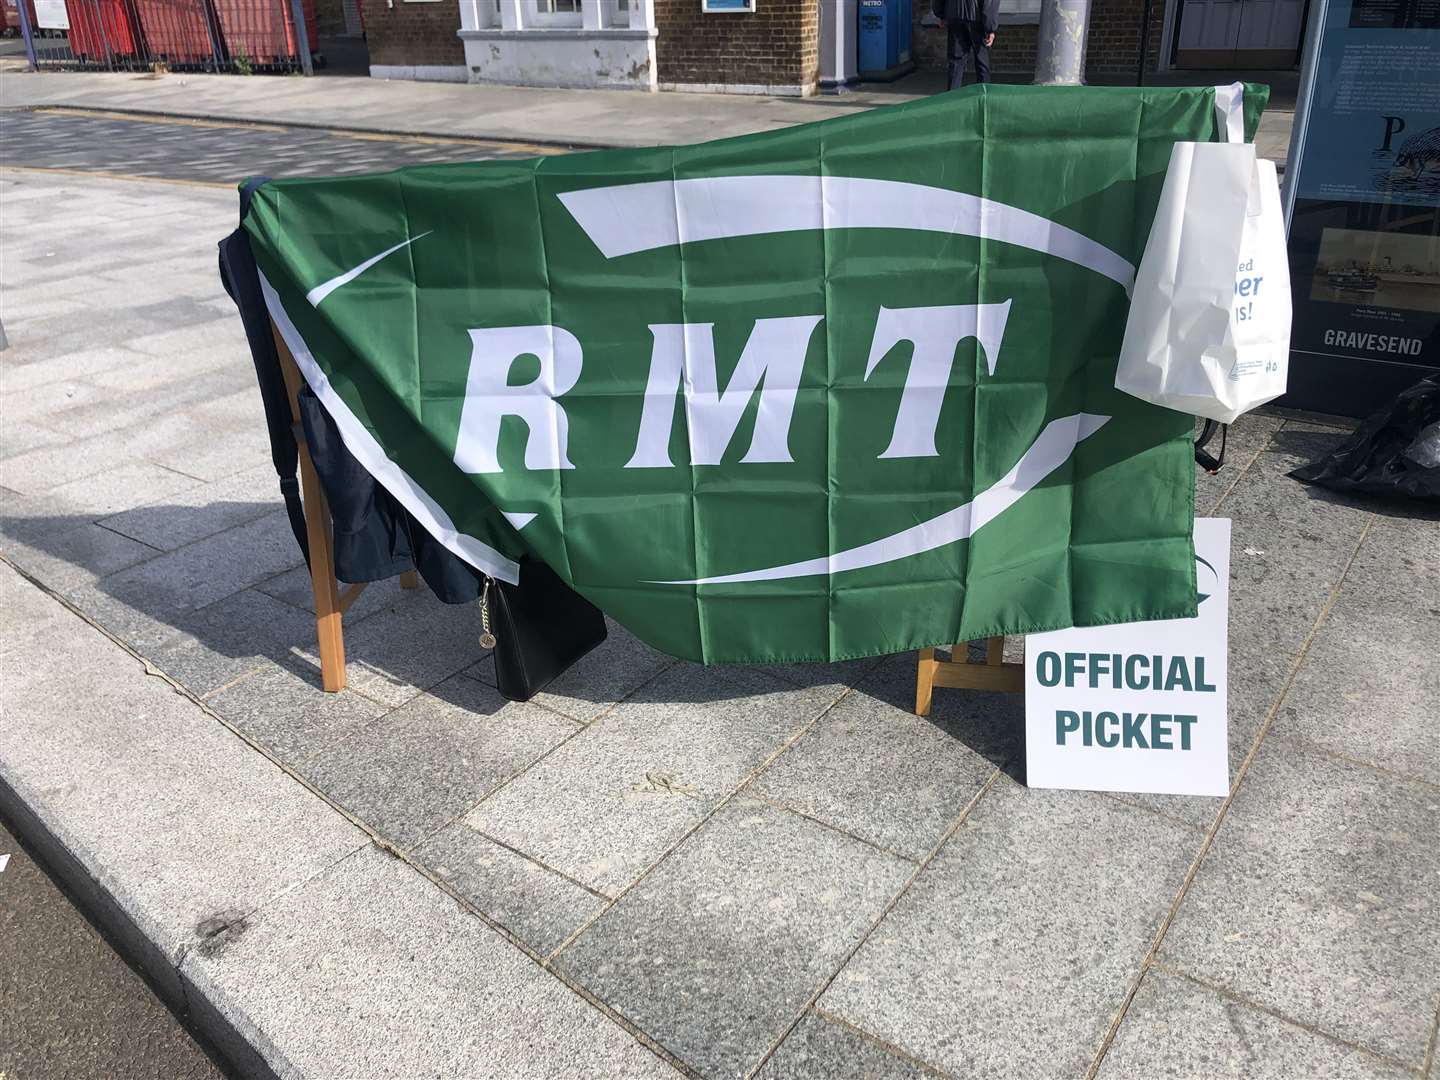 The RMT has announced three strike dates for July and August